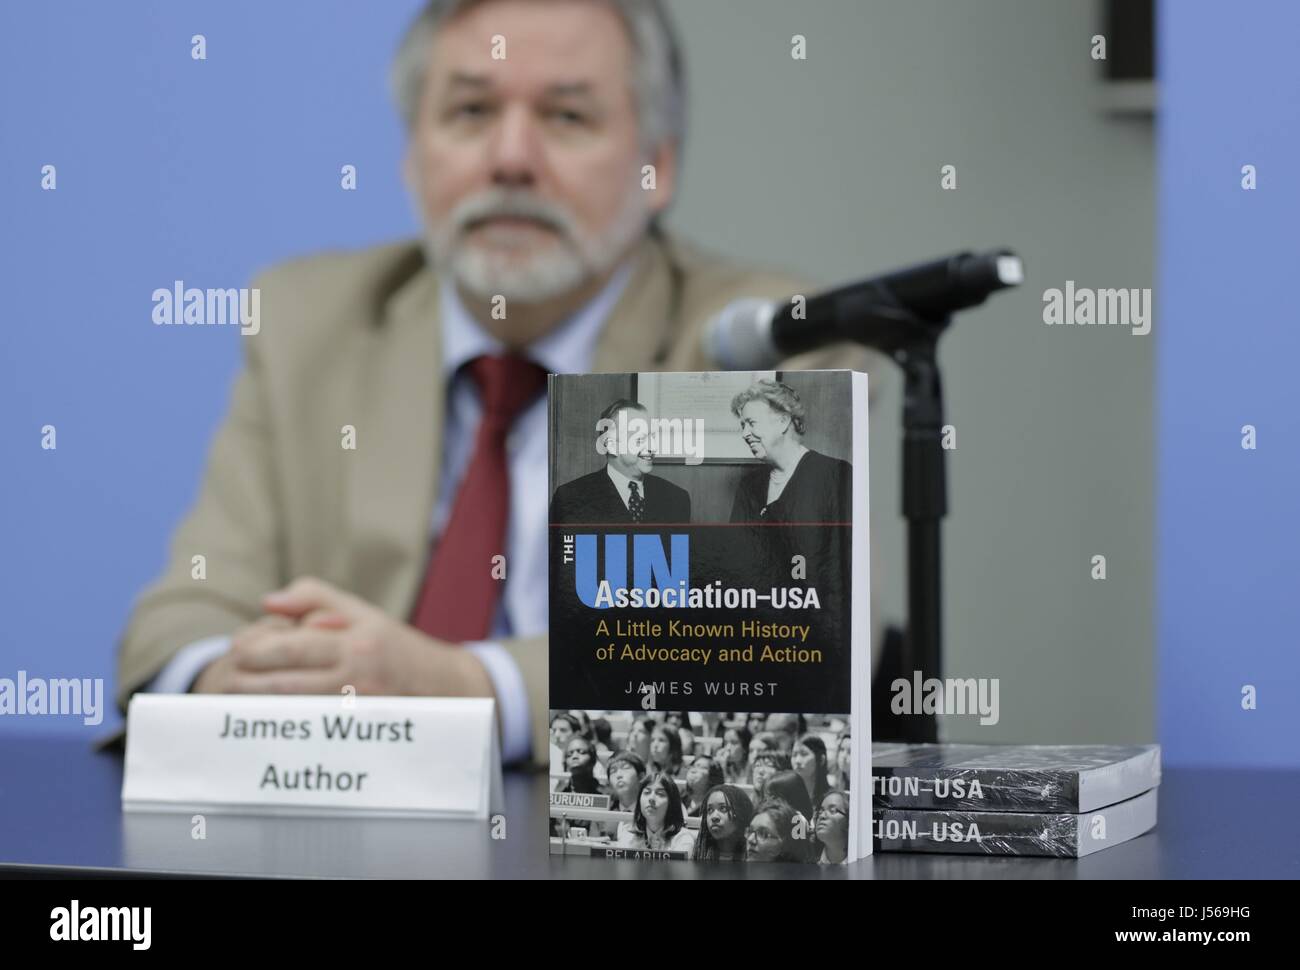 United Nations, New York, USA, May 16 2017 - Book introduction by James Wurst 'The UN Association-USA: A Little Known History of Advocacy and Action' today at the UN Headquarters in New York. Photo: Luiz Rampelotto/EuropaNewswire | Verwendung weltweit Stock Photo